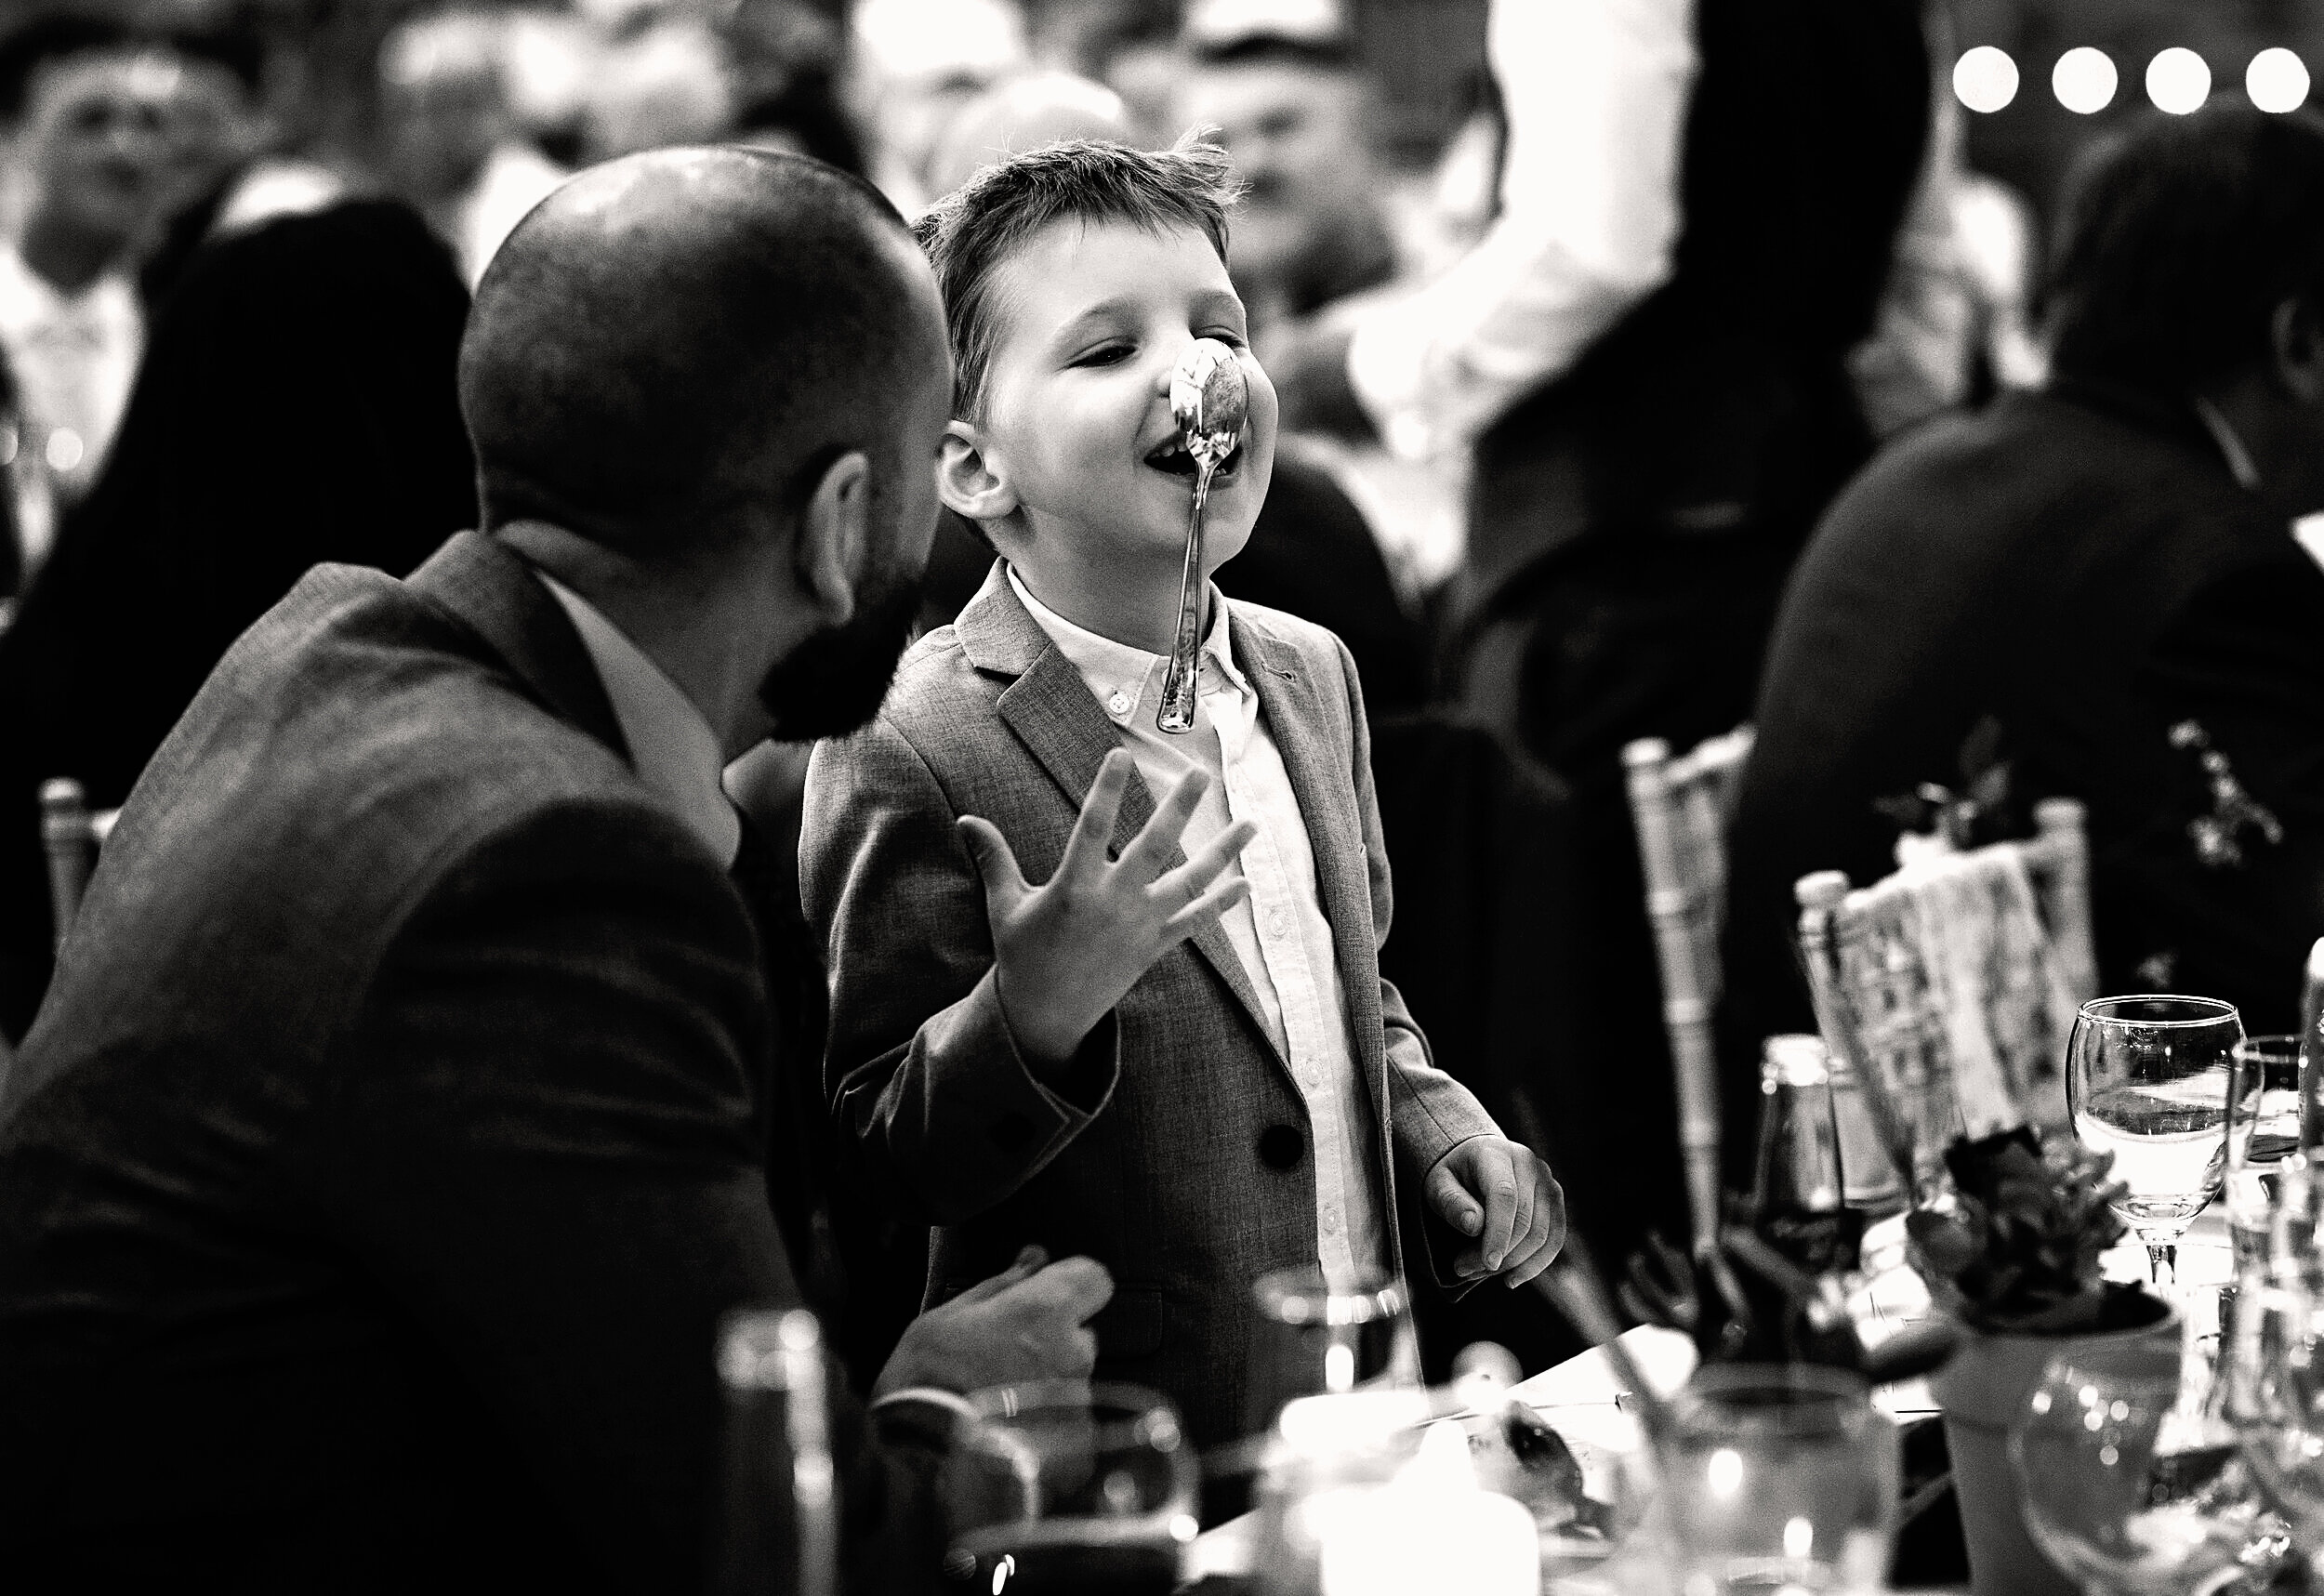 A young lad balancing a spoon on his nose during speeches